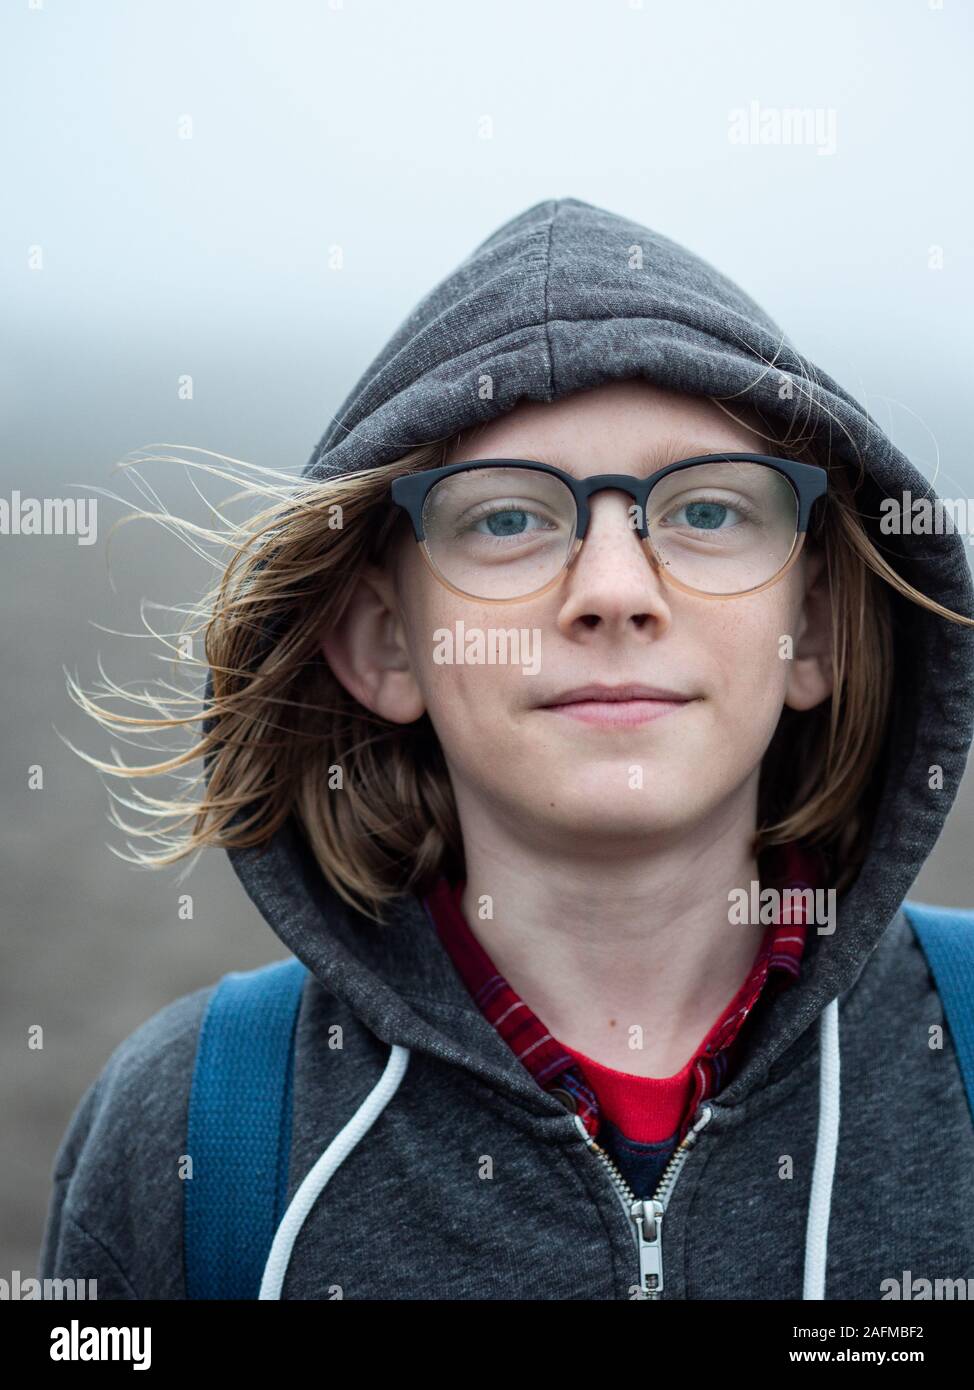 Portrait of tween wearing glasses and hood smiling Stock Photo